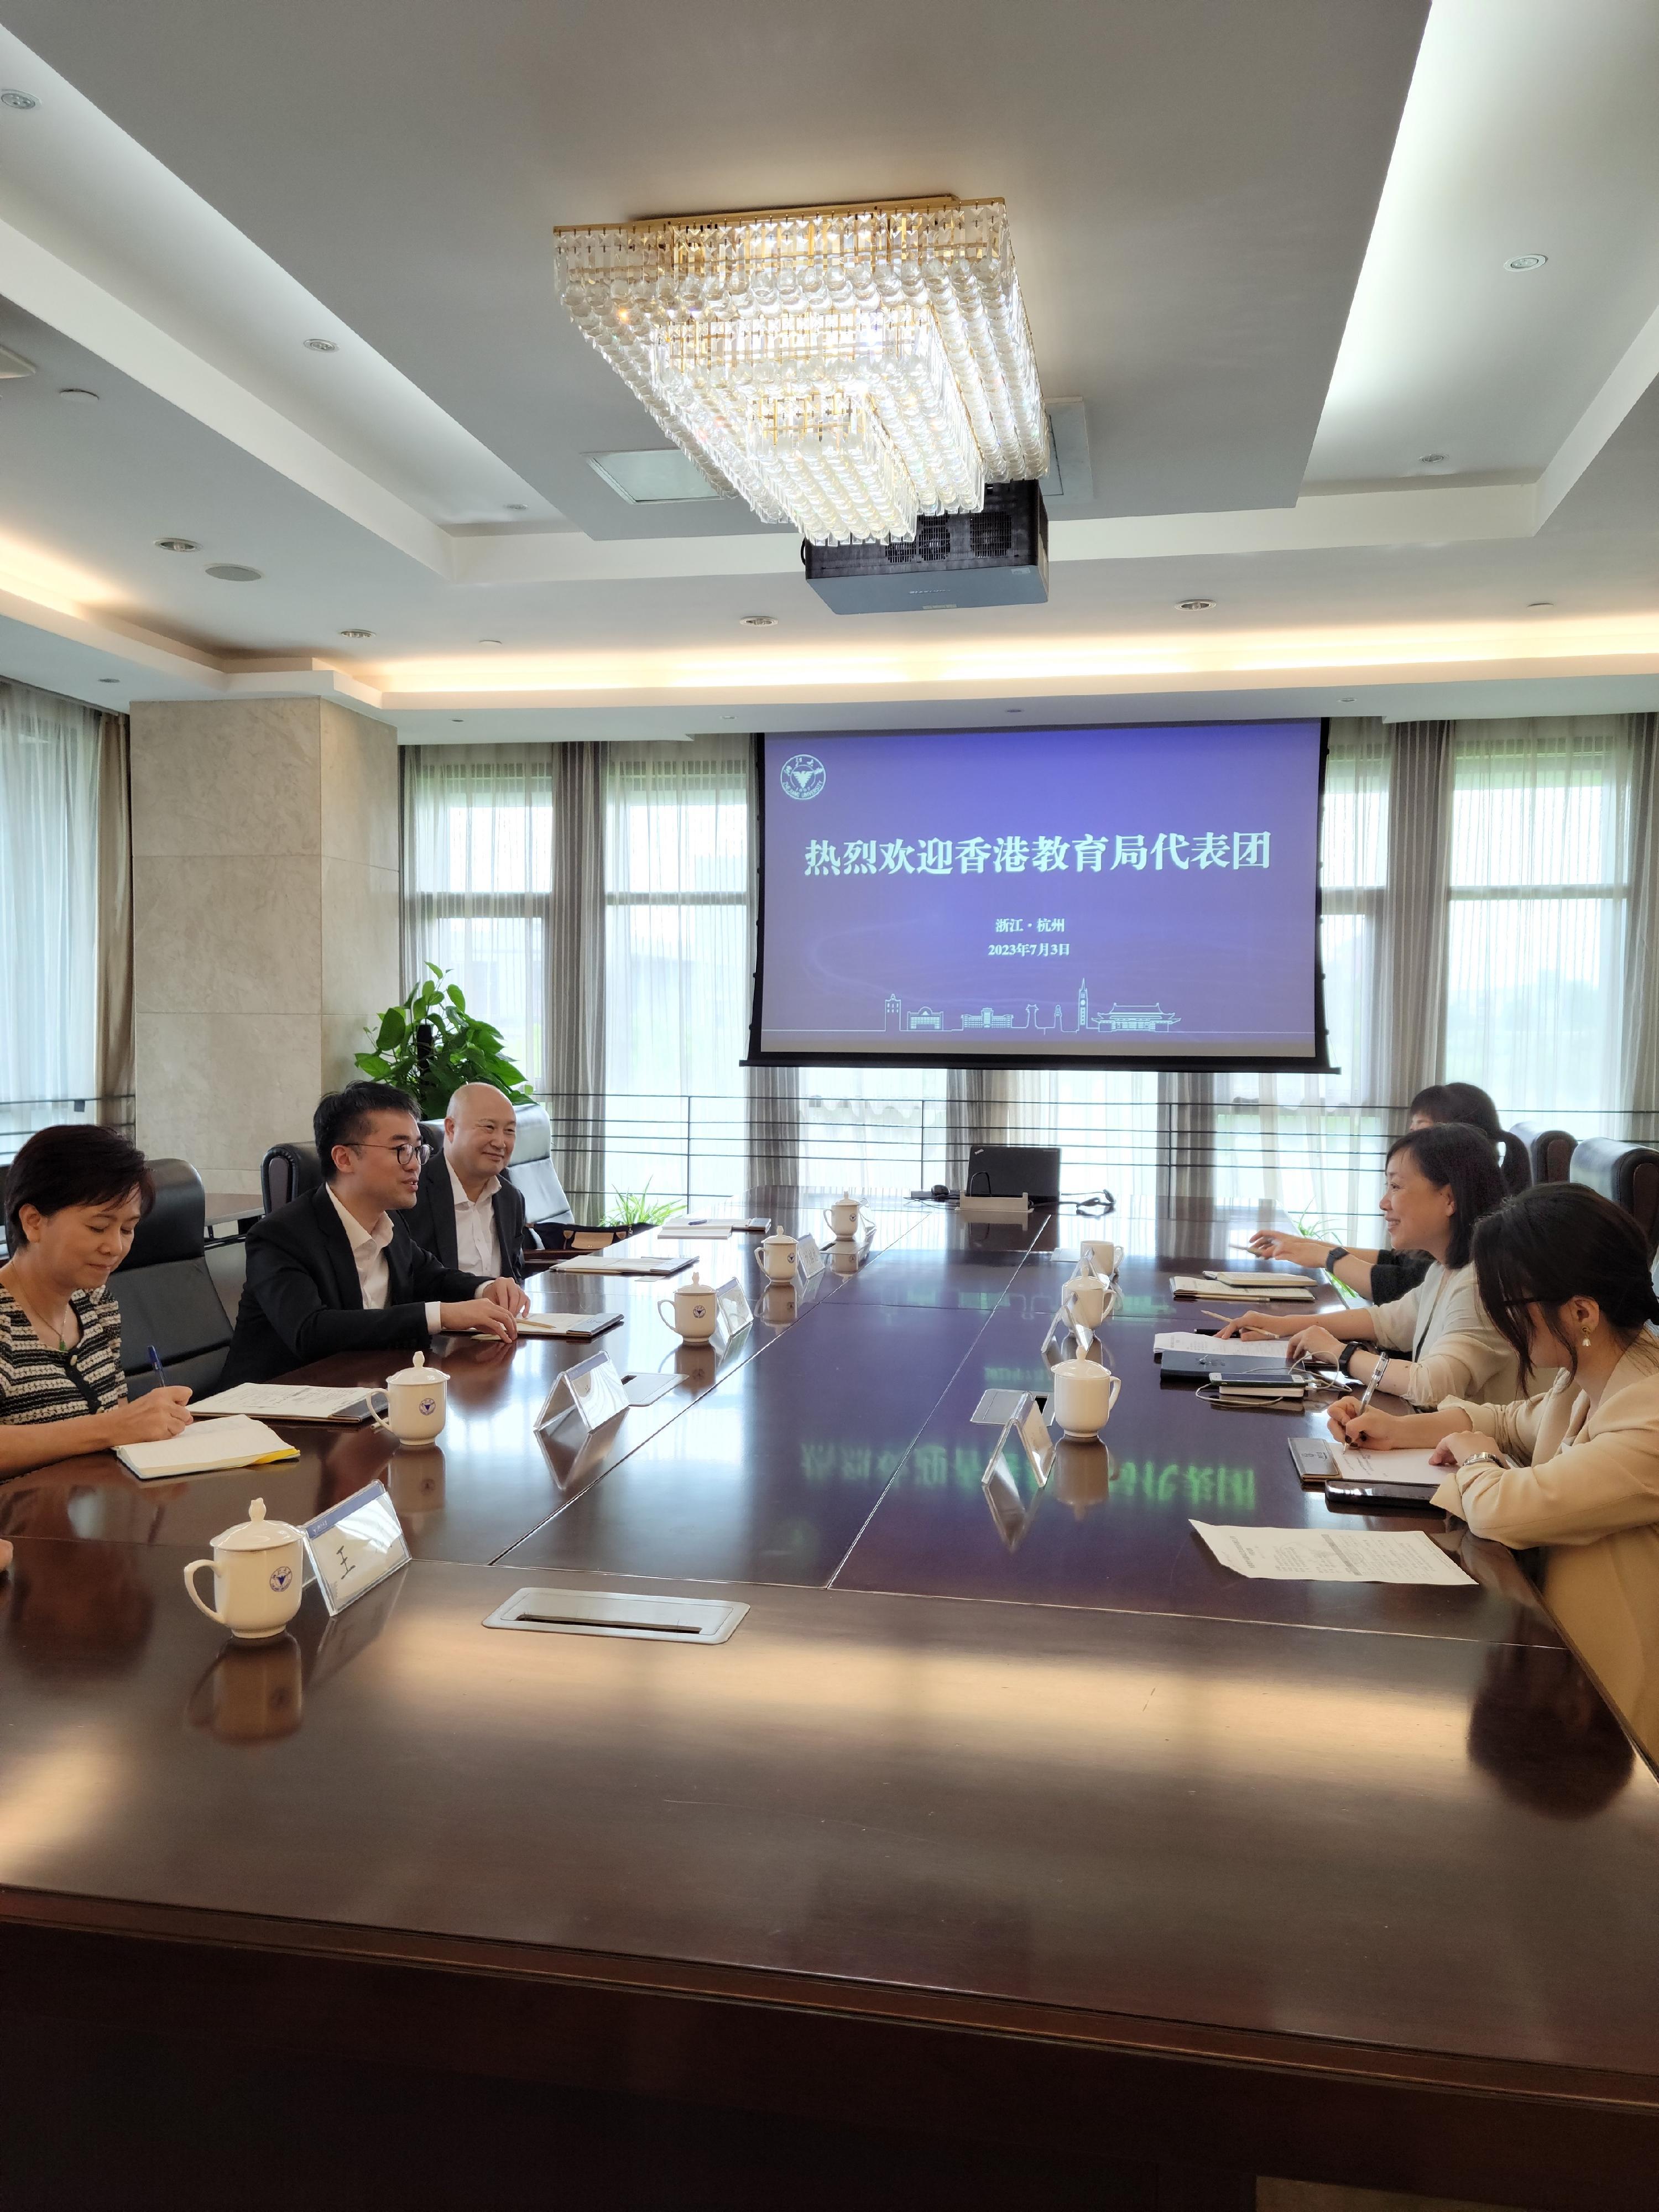 The Under Secretary for Education, Mr Sze Chun-fai (second left), meets the Director of the Hong Kong, Macao and Taiwan Affairs Office of Zhejiang University, Professor Li Min (second right), during his visit to Zhejiang on July 3.